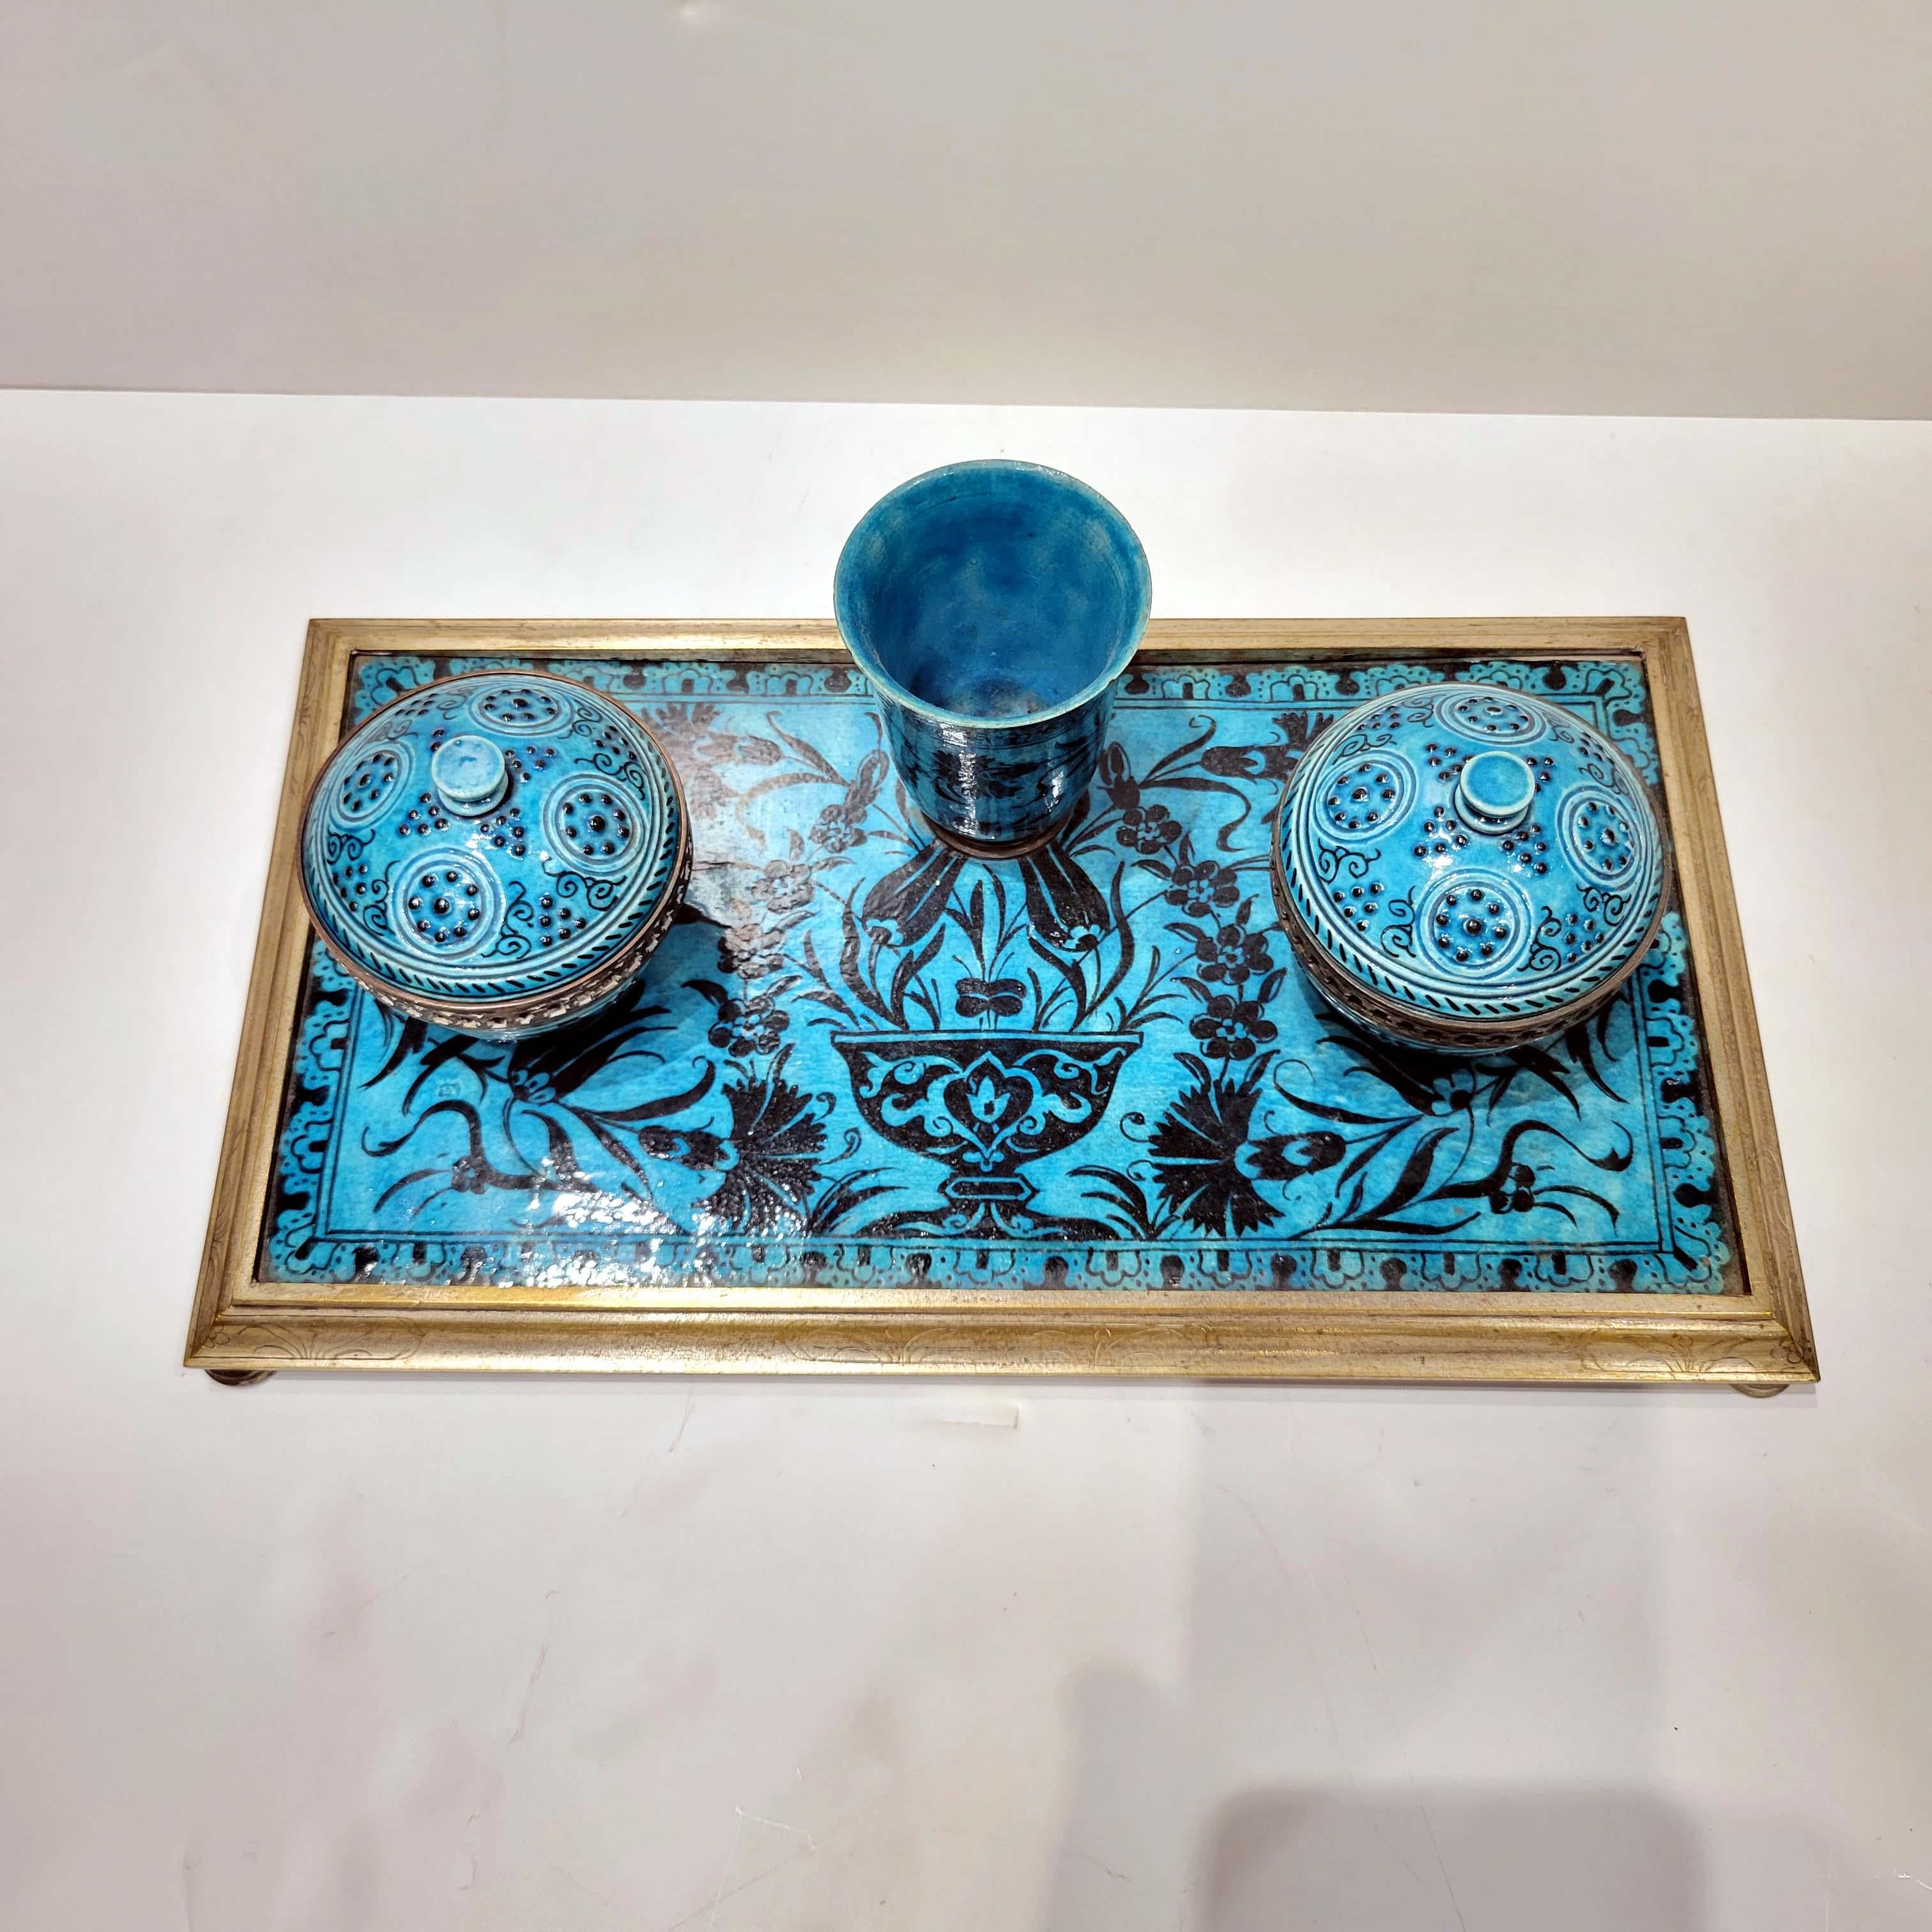 A beautiful rare silvered bronze mounted double inkwell in Islamic taste after Seljuk tile design.
Circa late 19th century.
Hand painted and glazed ceramic mounted in silvered bronze.
  